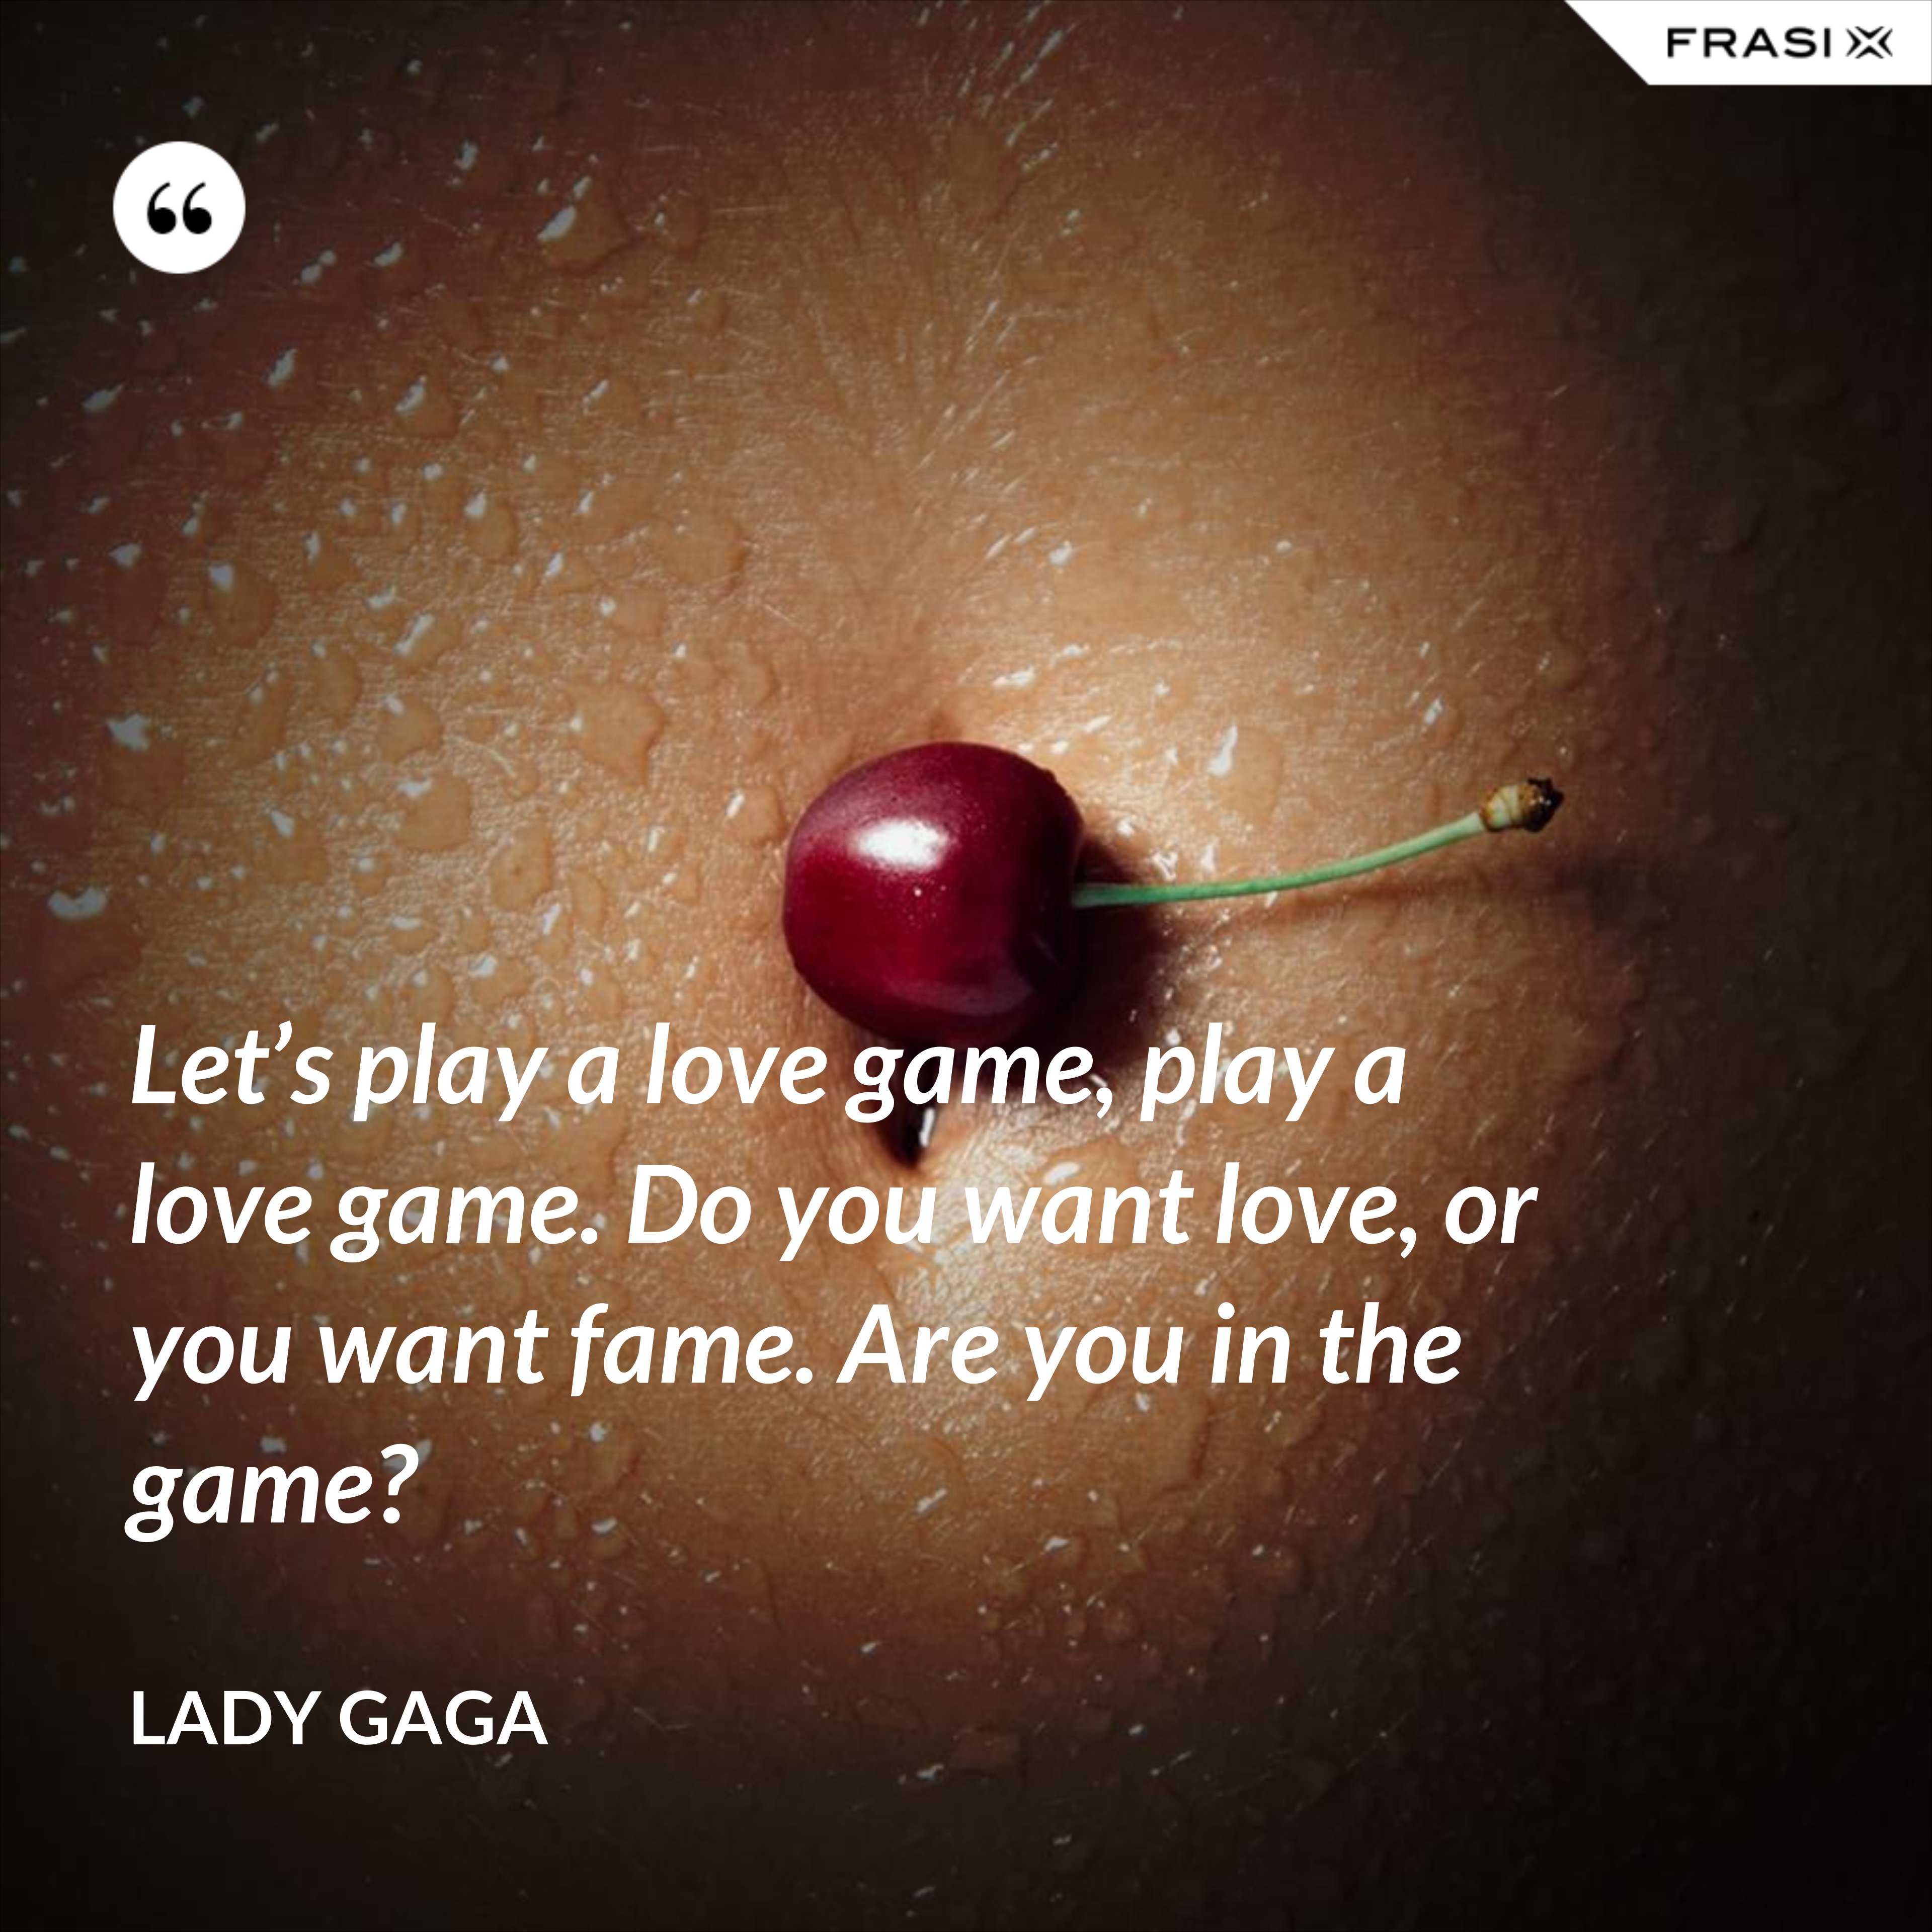 Let’s play a love game, play a love game. Do you want love, or you want fame. Are you in the game? - Lady Gaga